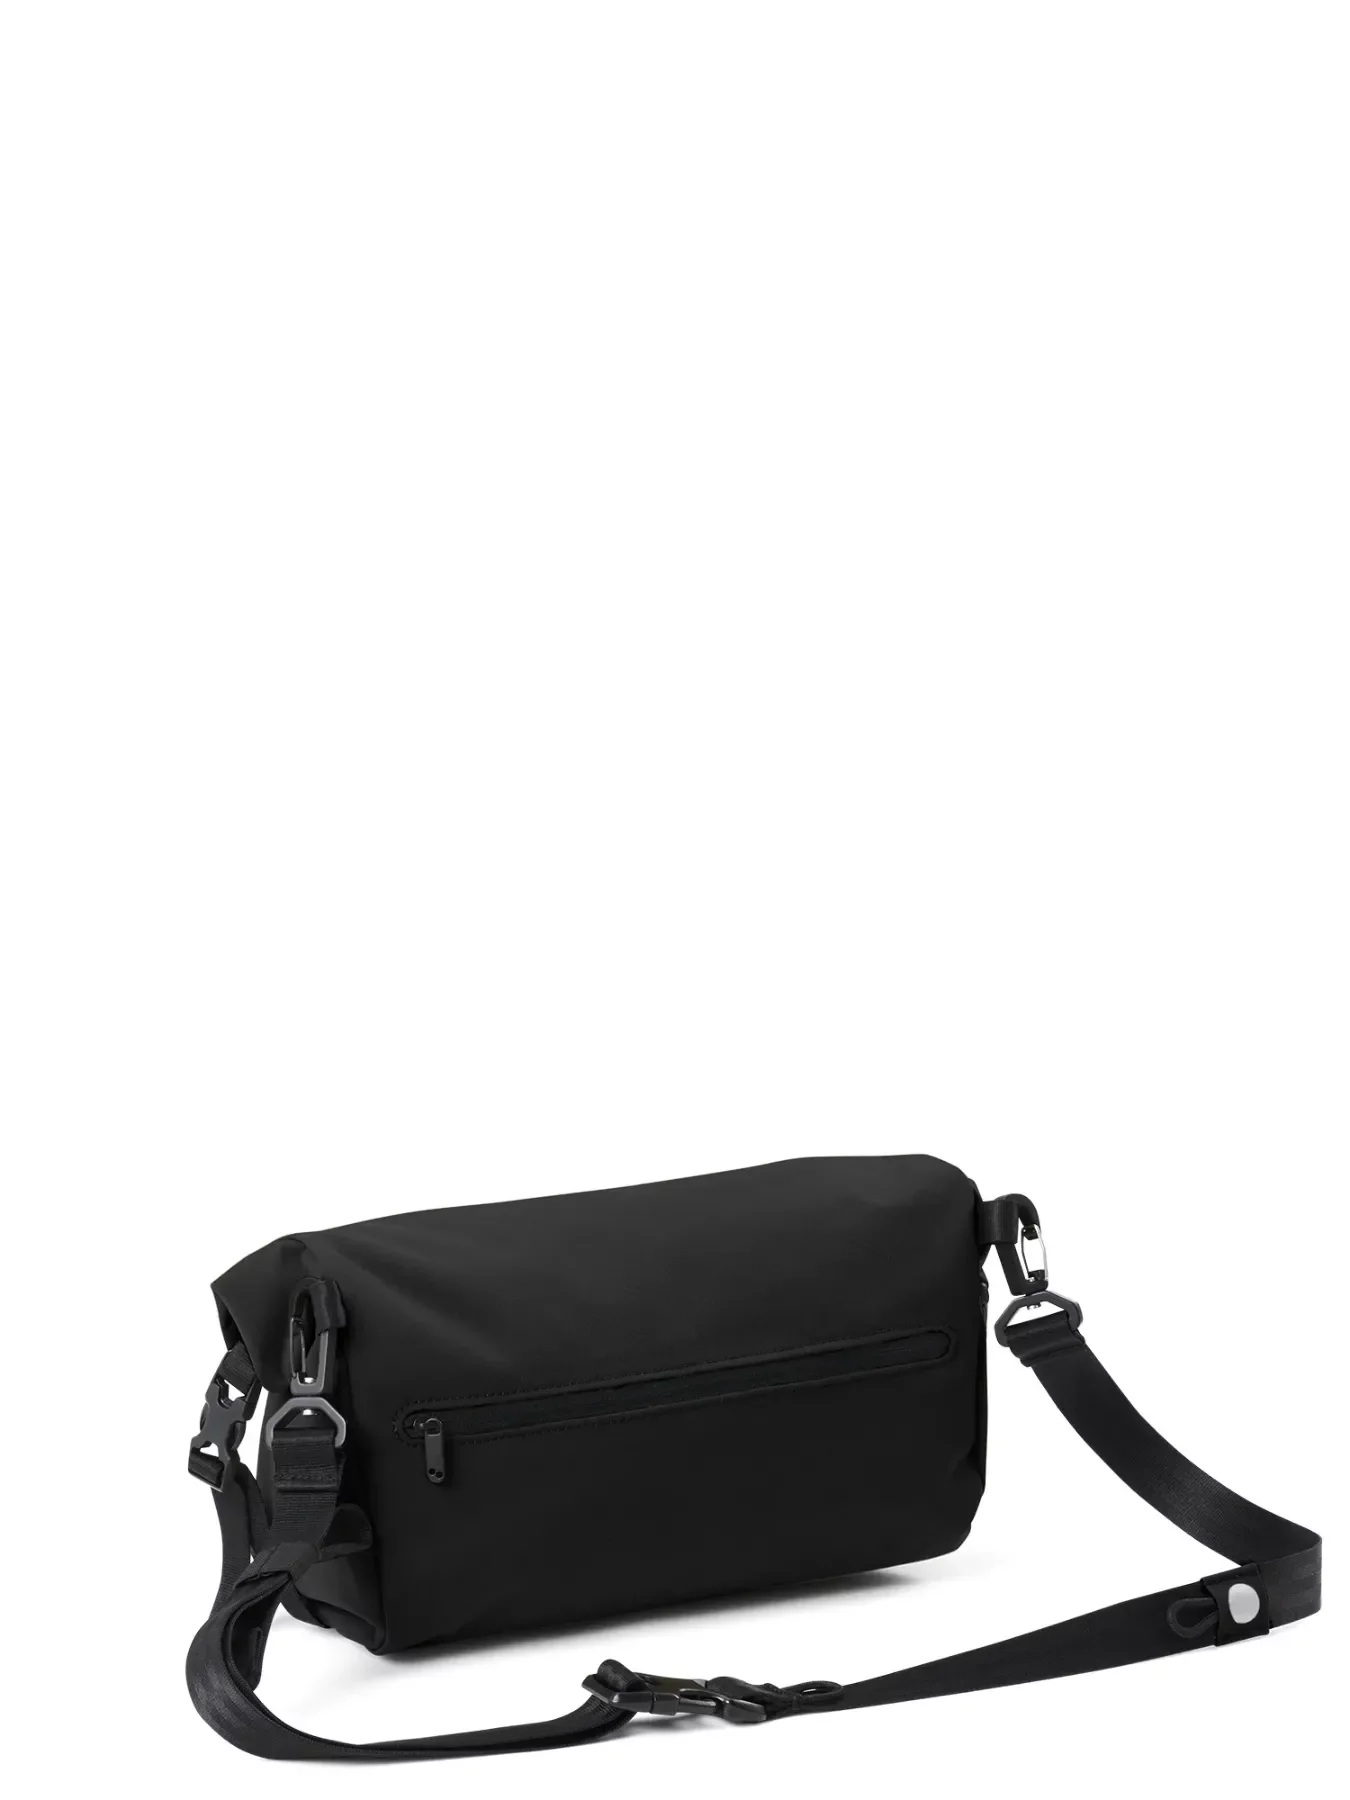 pinqponq Backpack AKSEL - Solid Black 5